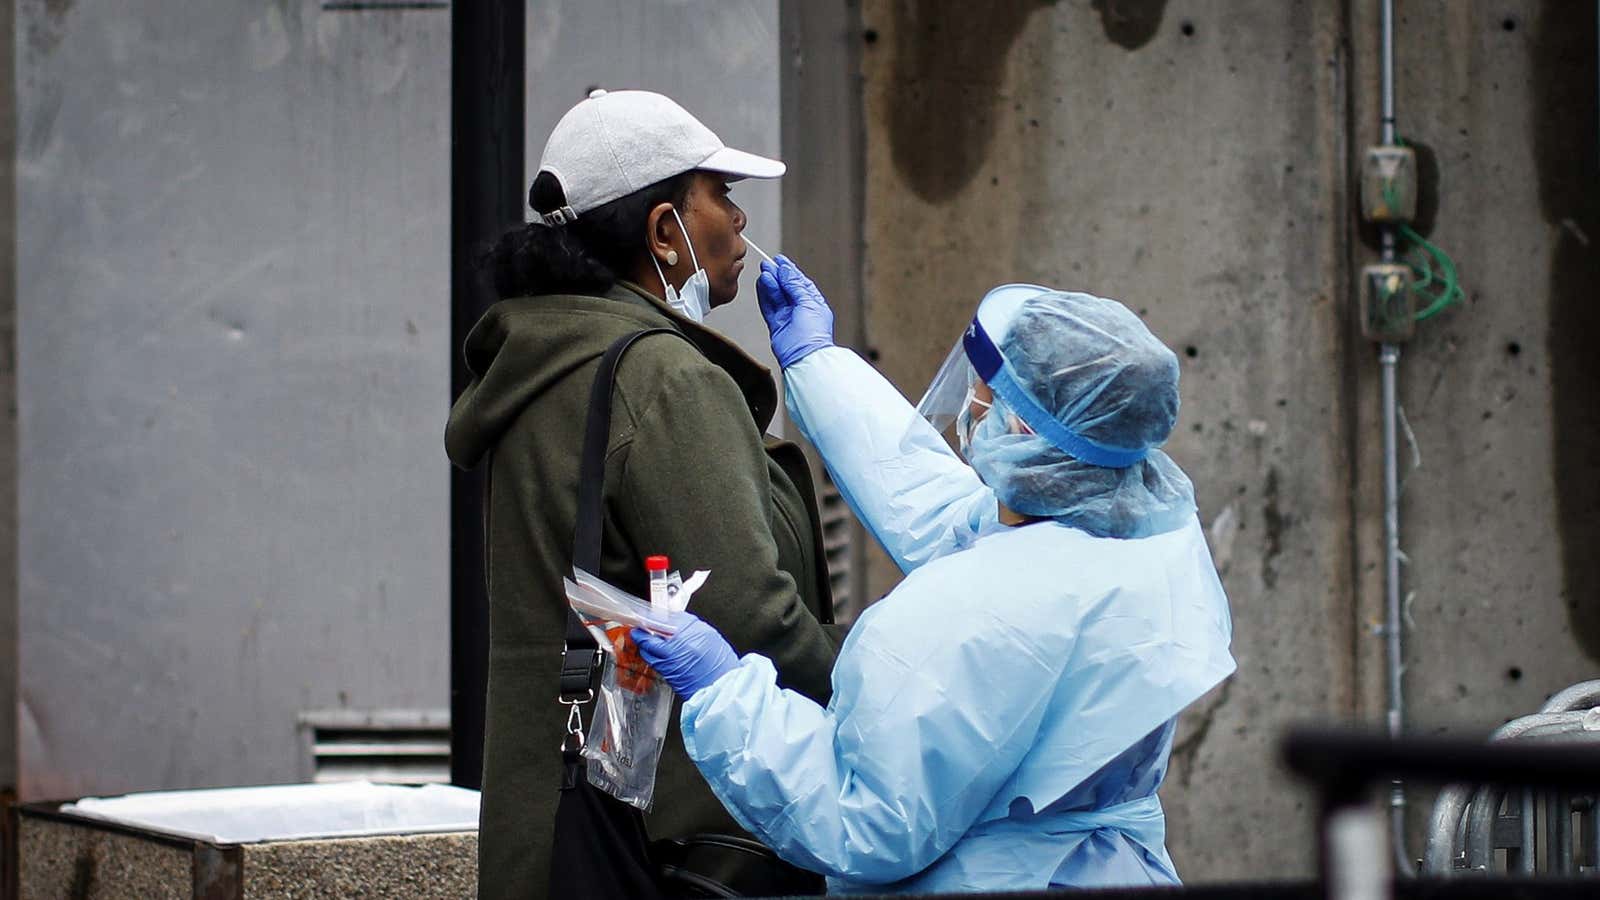 A patient is given a COVID-19 test by a medical worker outside Brooklyn Hospital Center, Sunday, March 29, 2020, in Brooklyn borough of New York.